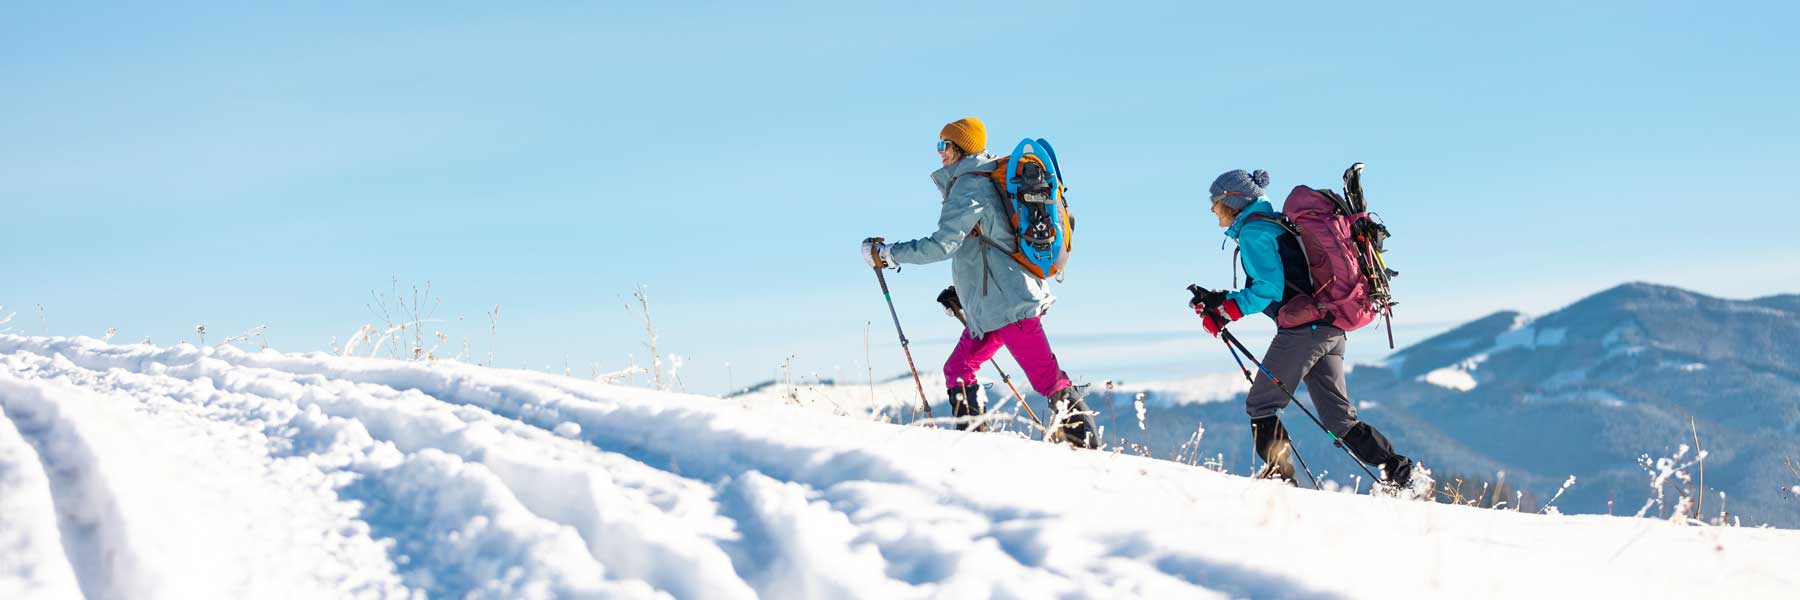 The Best Things To Do In Bozeman In The Winter - Go Snowshoeing